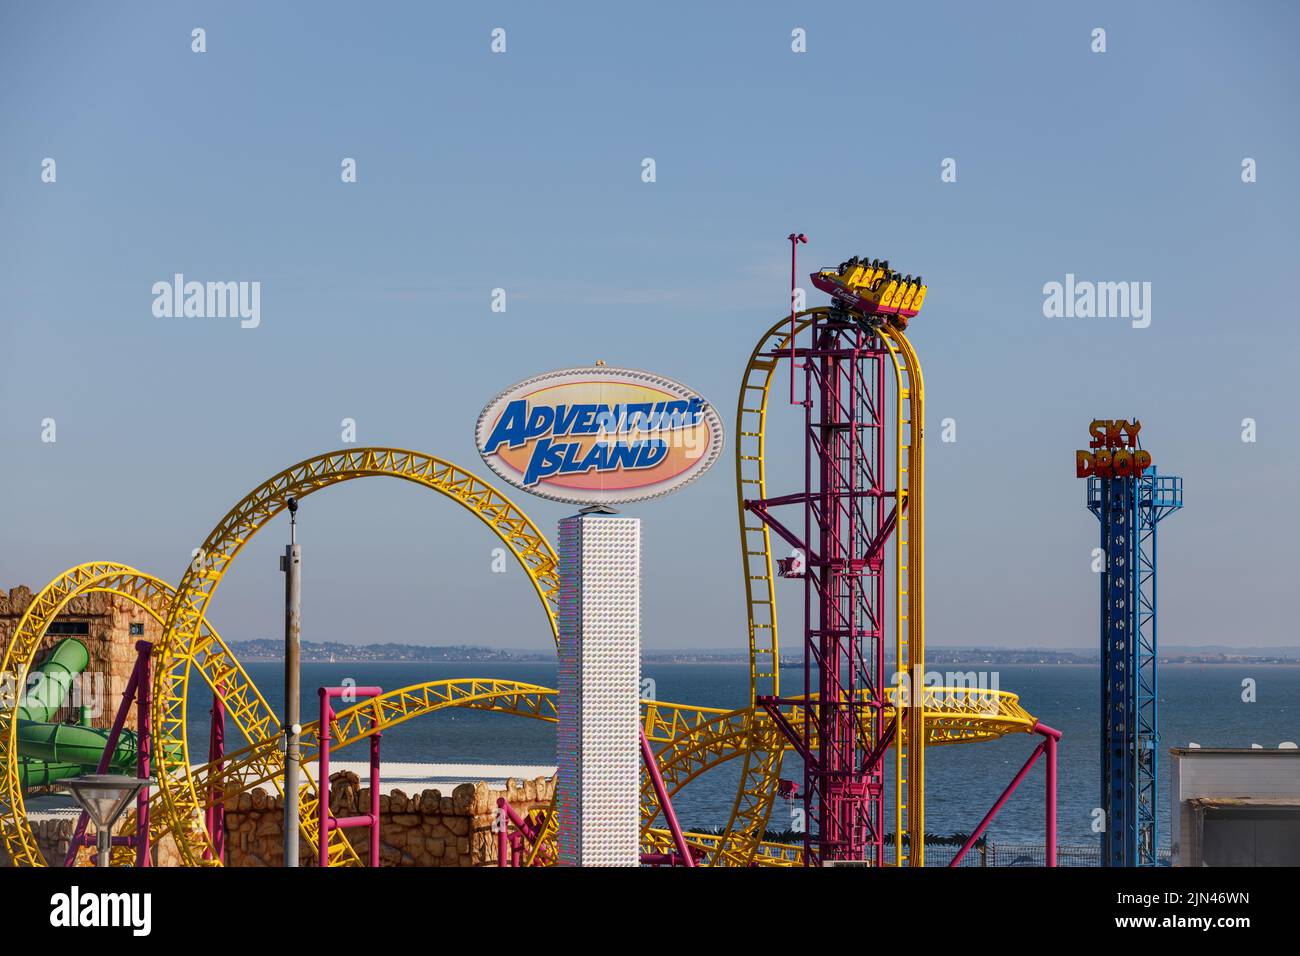 Adventure Island Amusement Park in Southend showing roller coaster rides and the River Thames Stock Photo